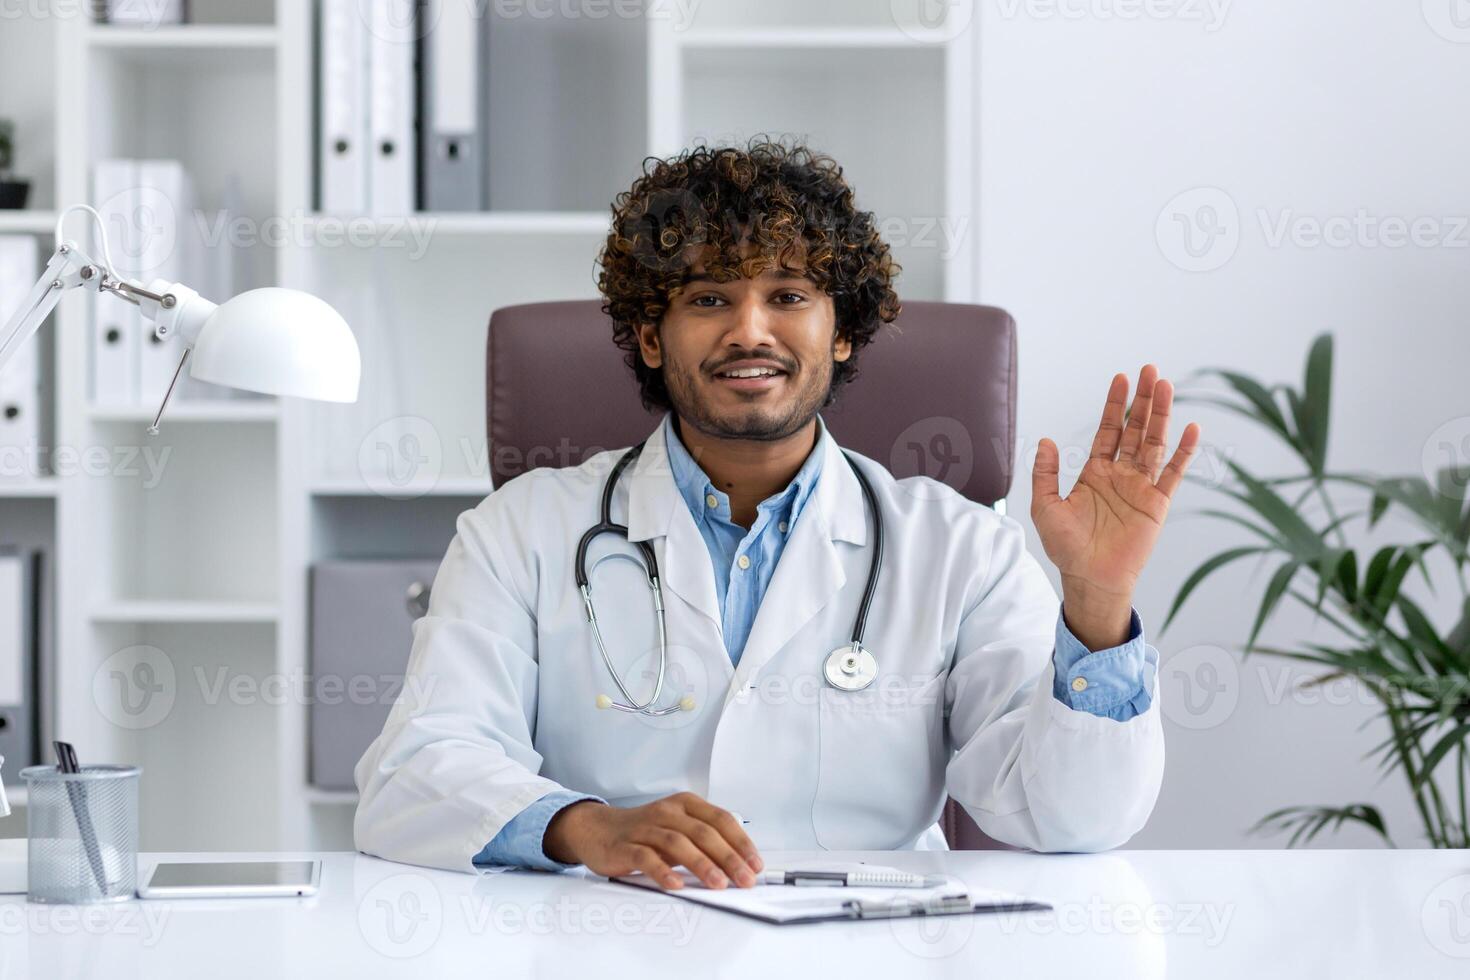 Webcam view, online call consultation, young Indian doctor in white medical coat looking at camera, waving hand greeting to patient, doctor working remotely inside clinic office with laptop. photo